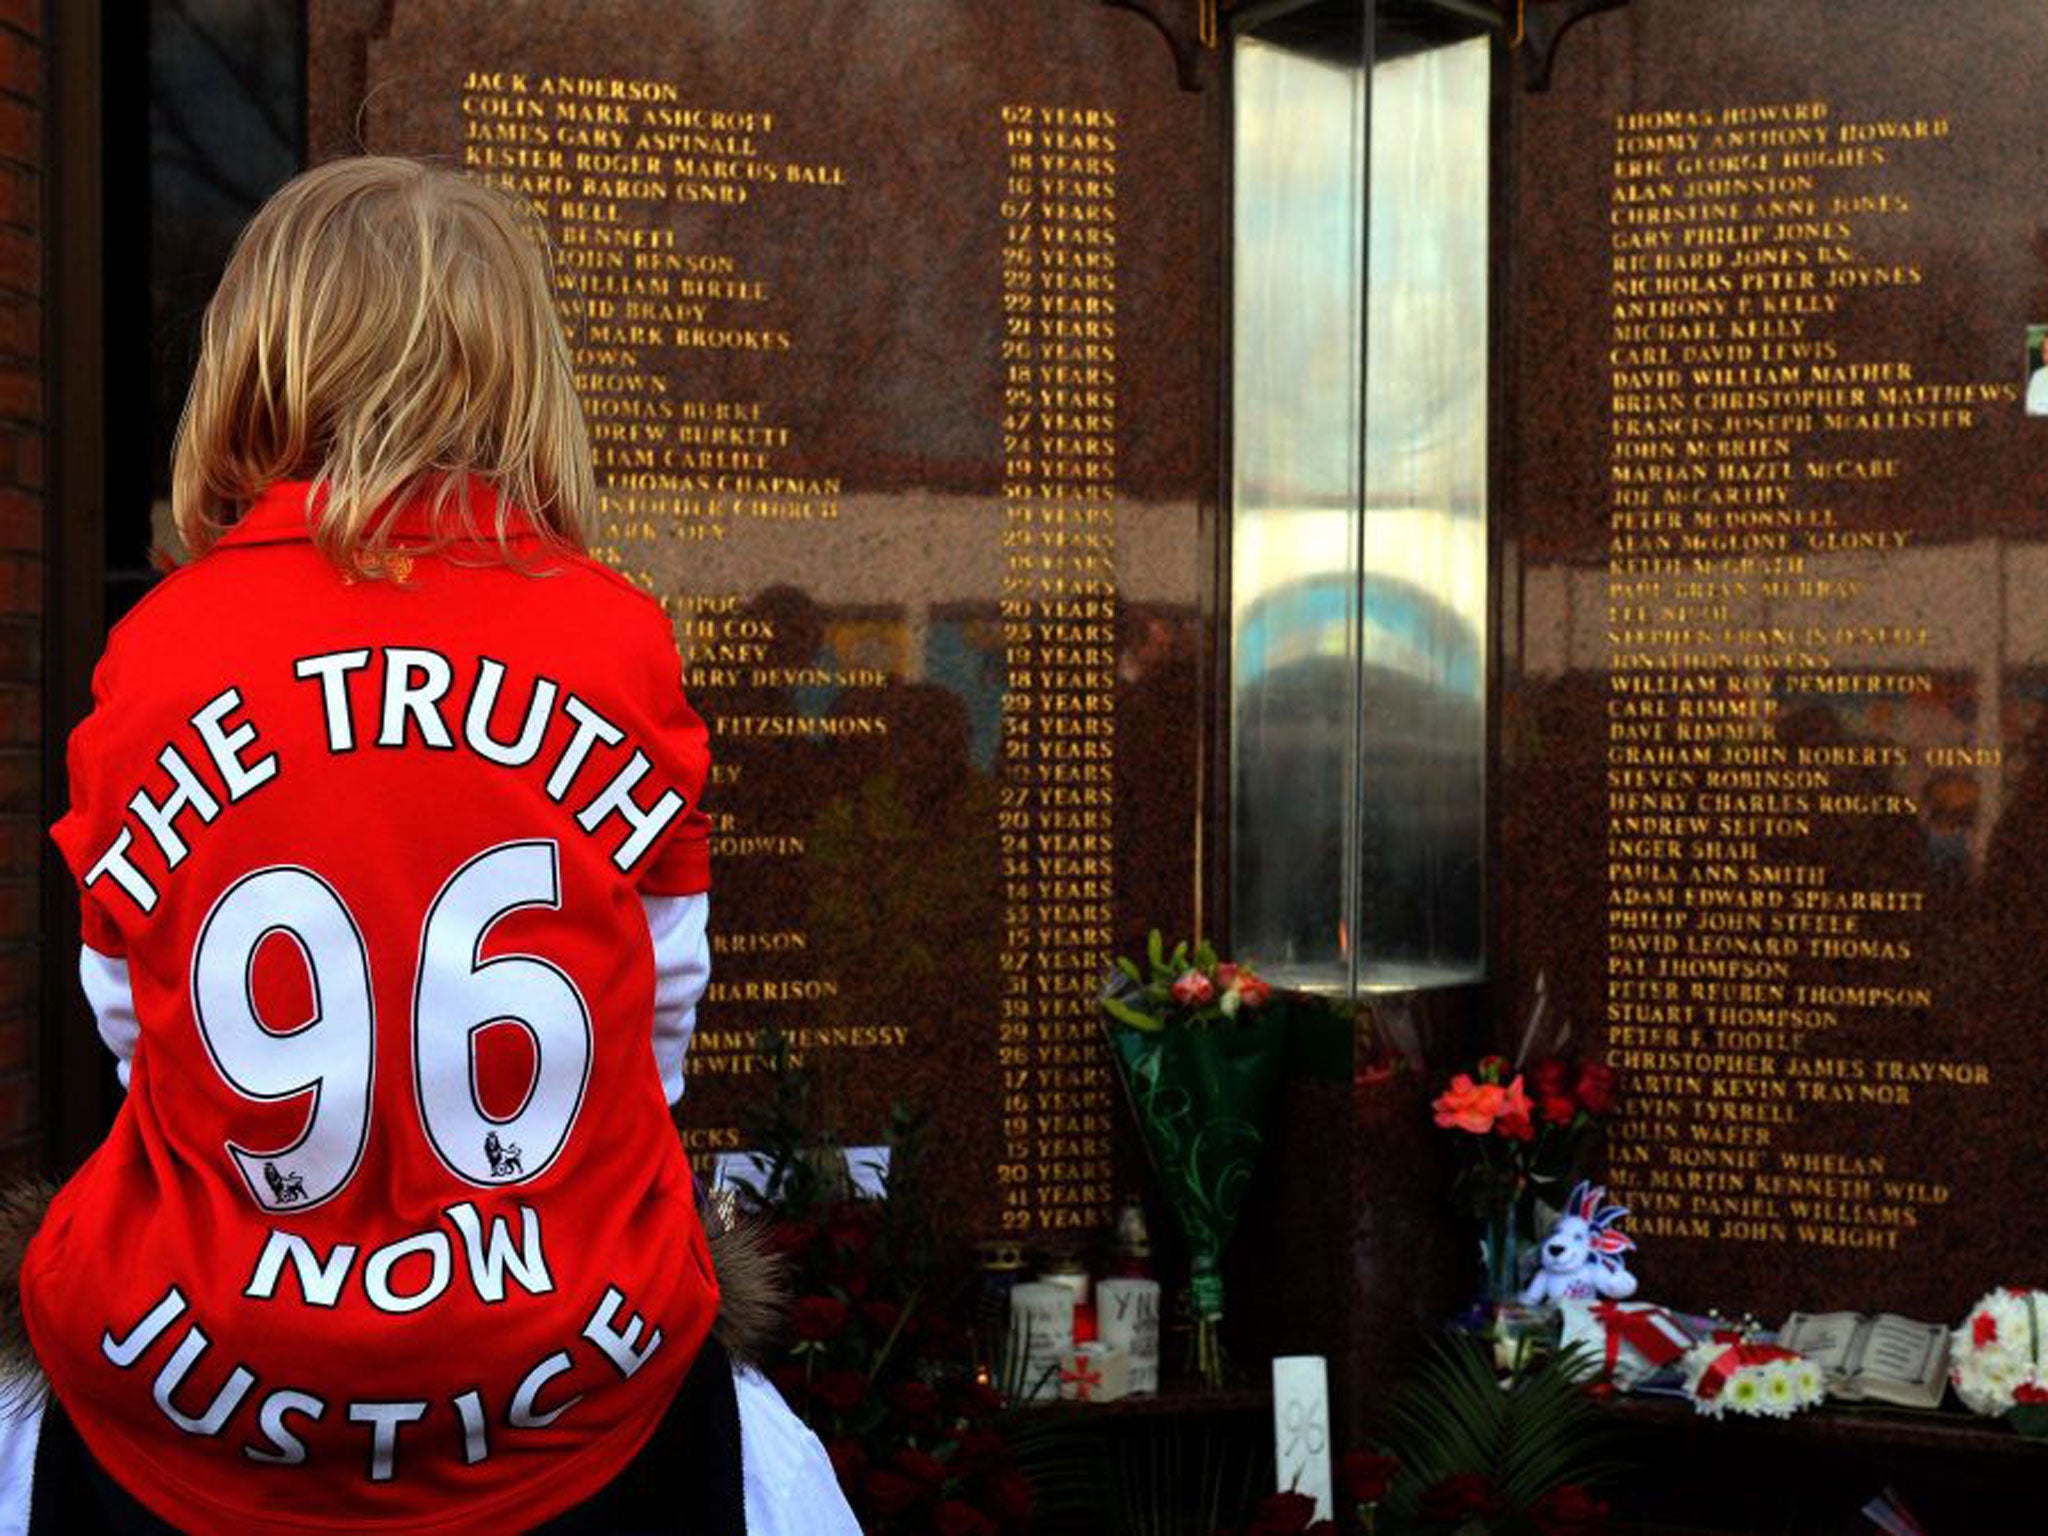 A child wears a Jersey bearing the writing "Justice for the 96" in front of the Hillsborough Memorial at Liverpool FC's Anfield football ground